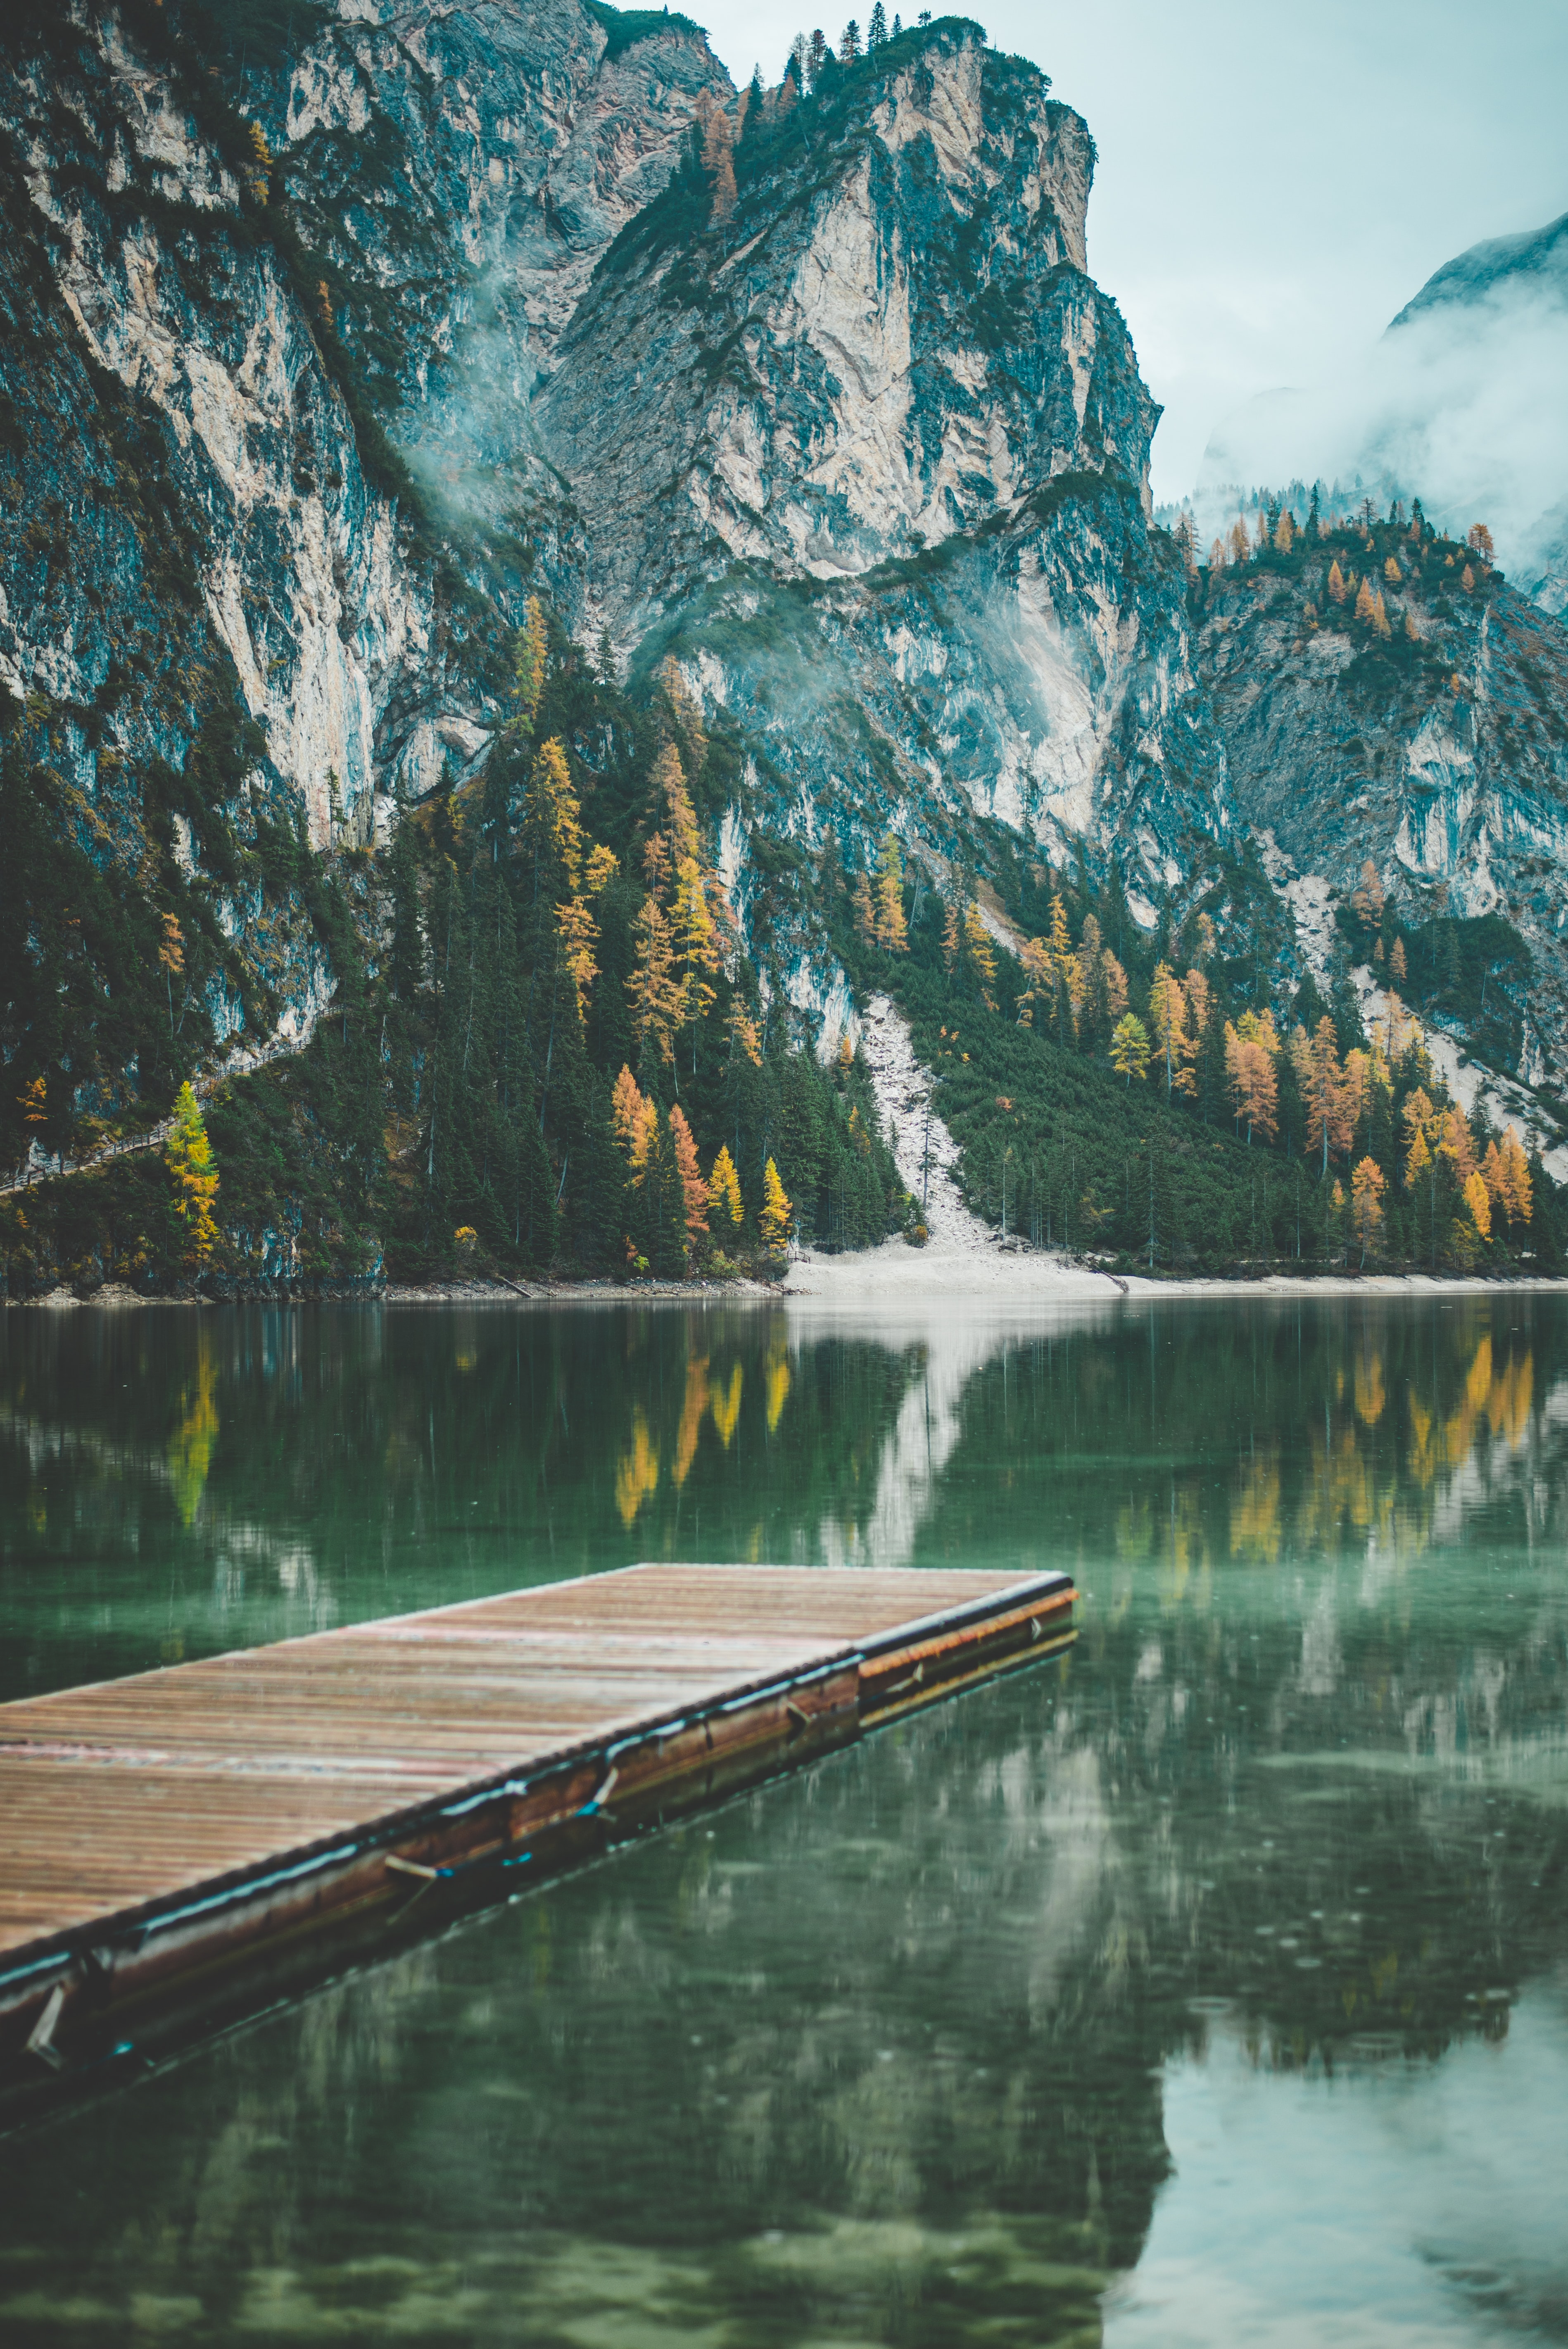 italy, mountains, pier, nature, trees, lake, reflection cellphone